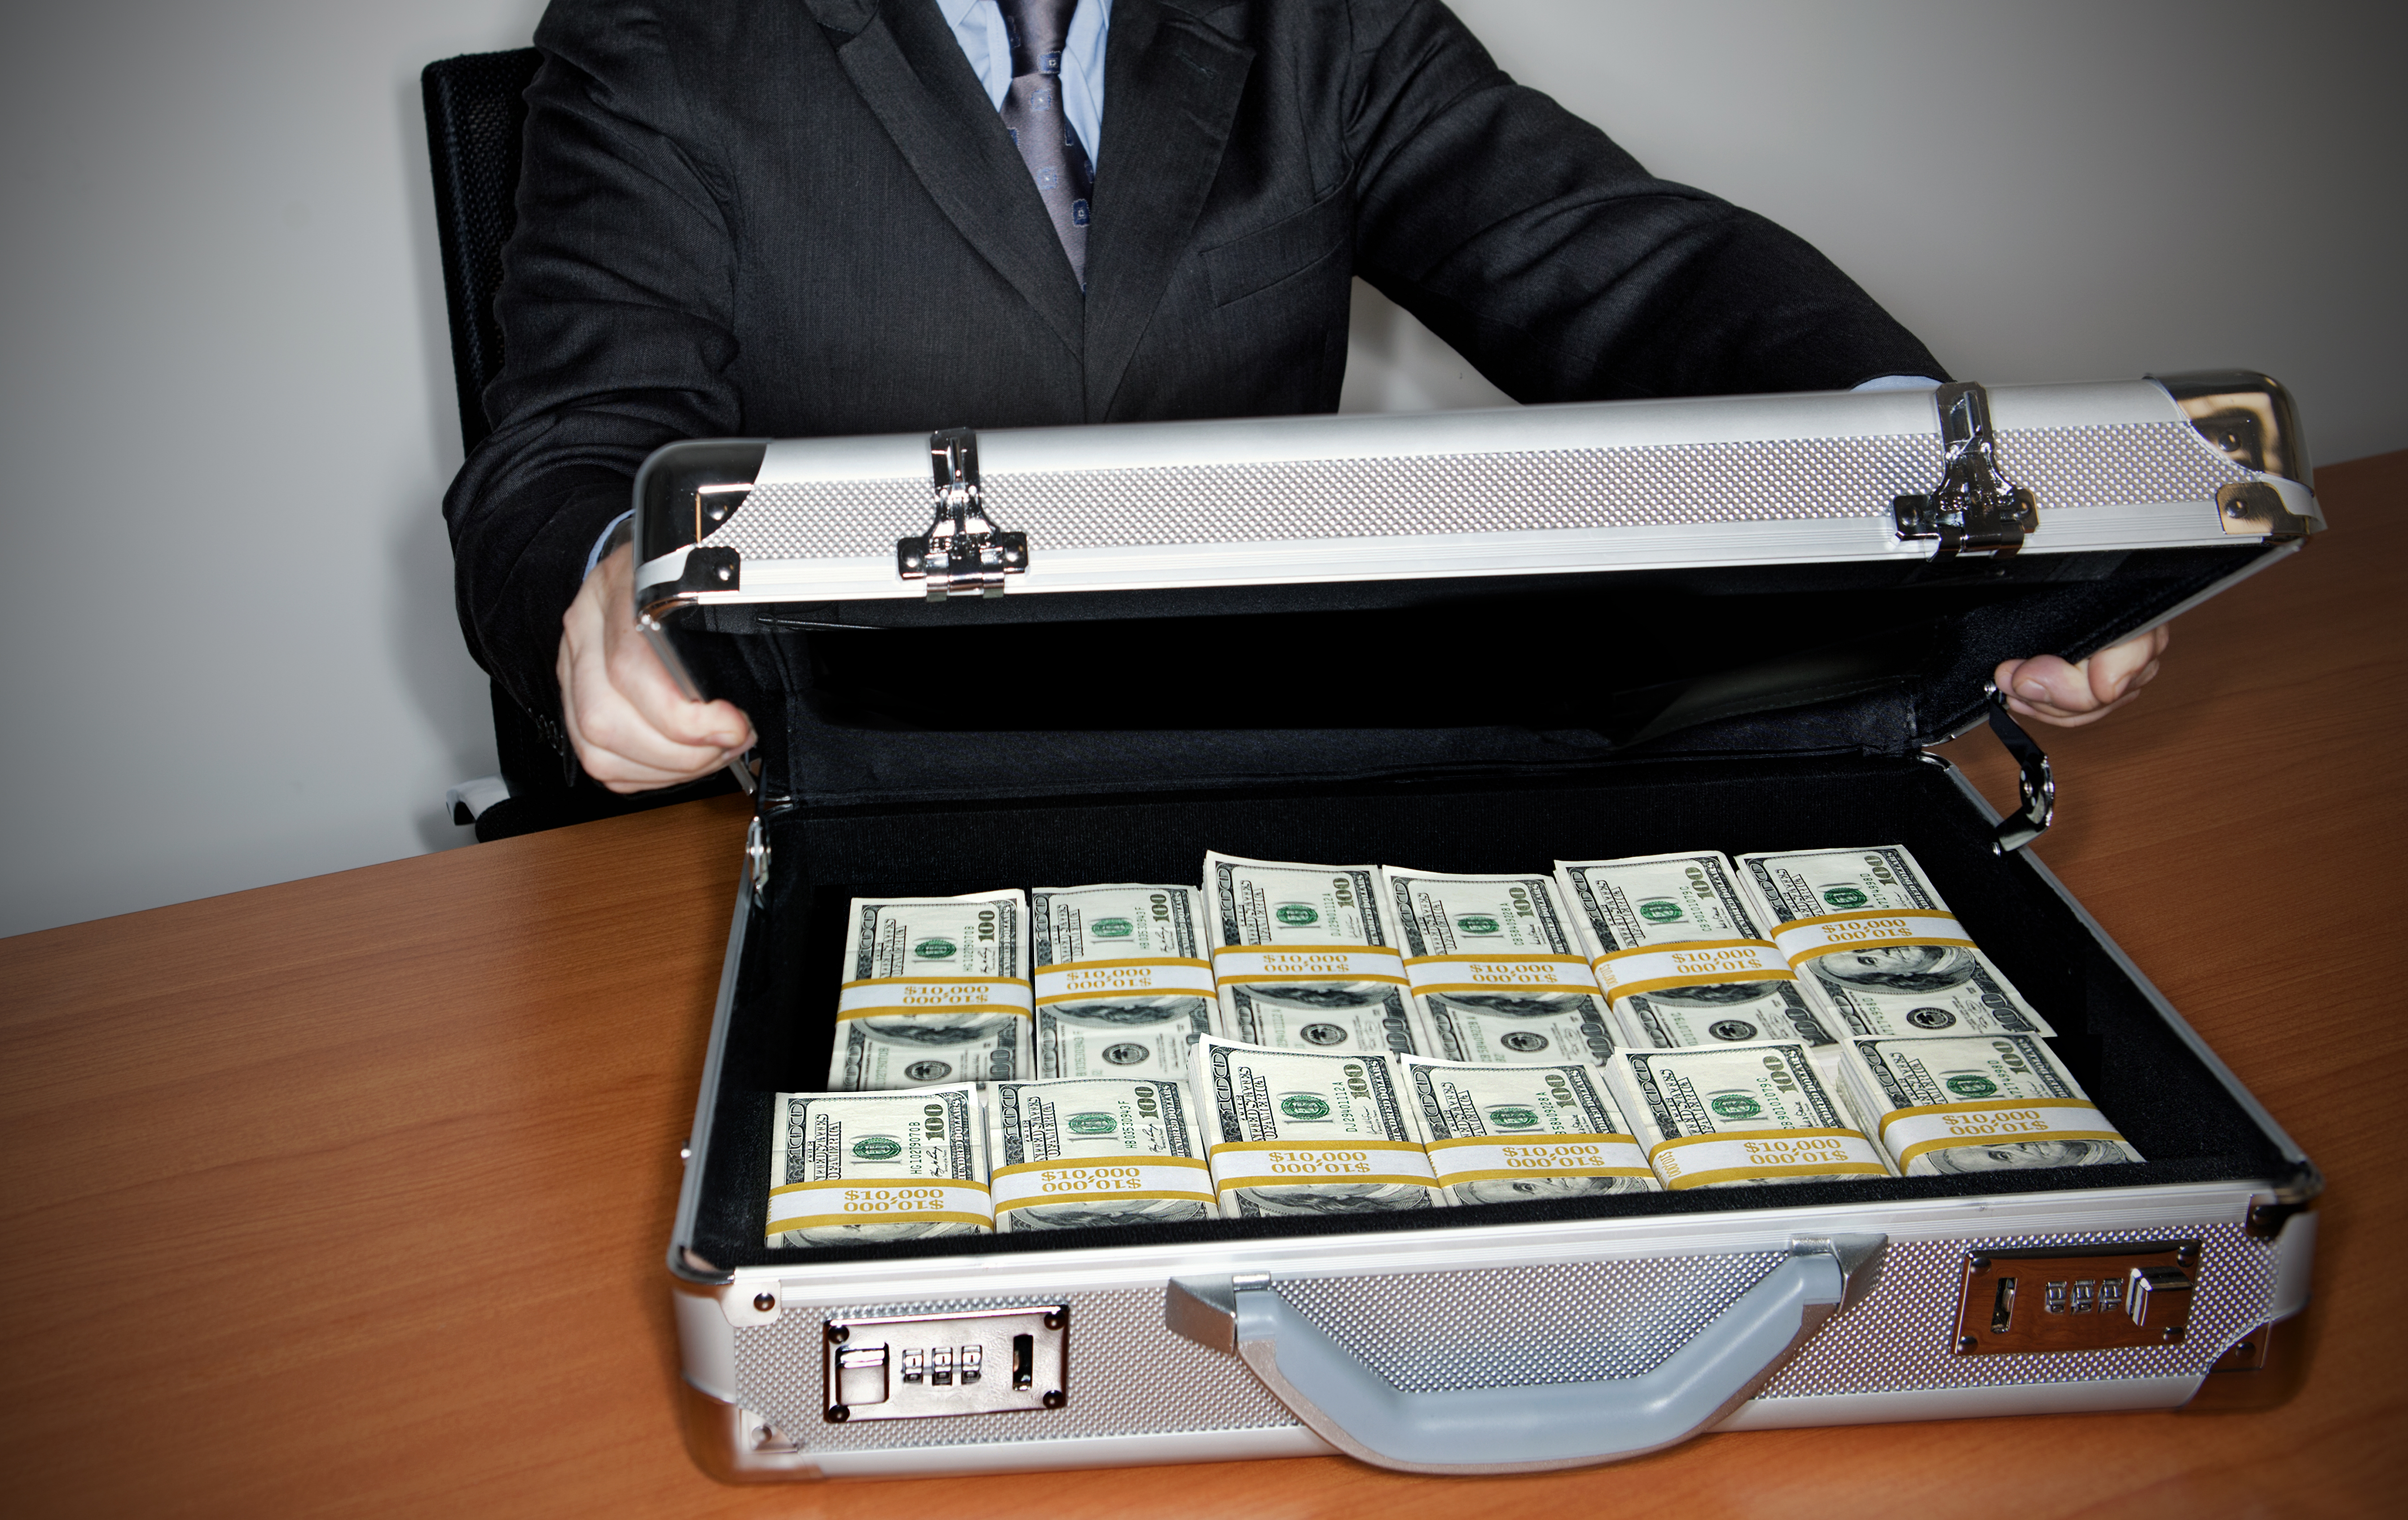 A full case of money | Source: Getty Images